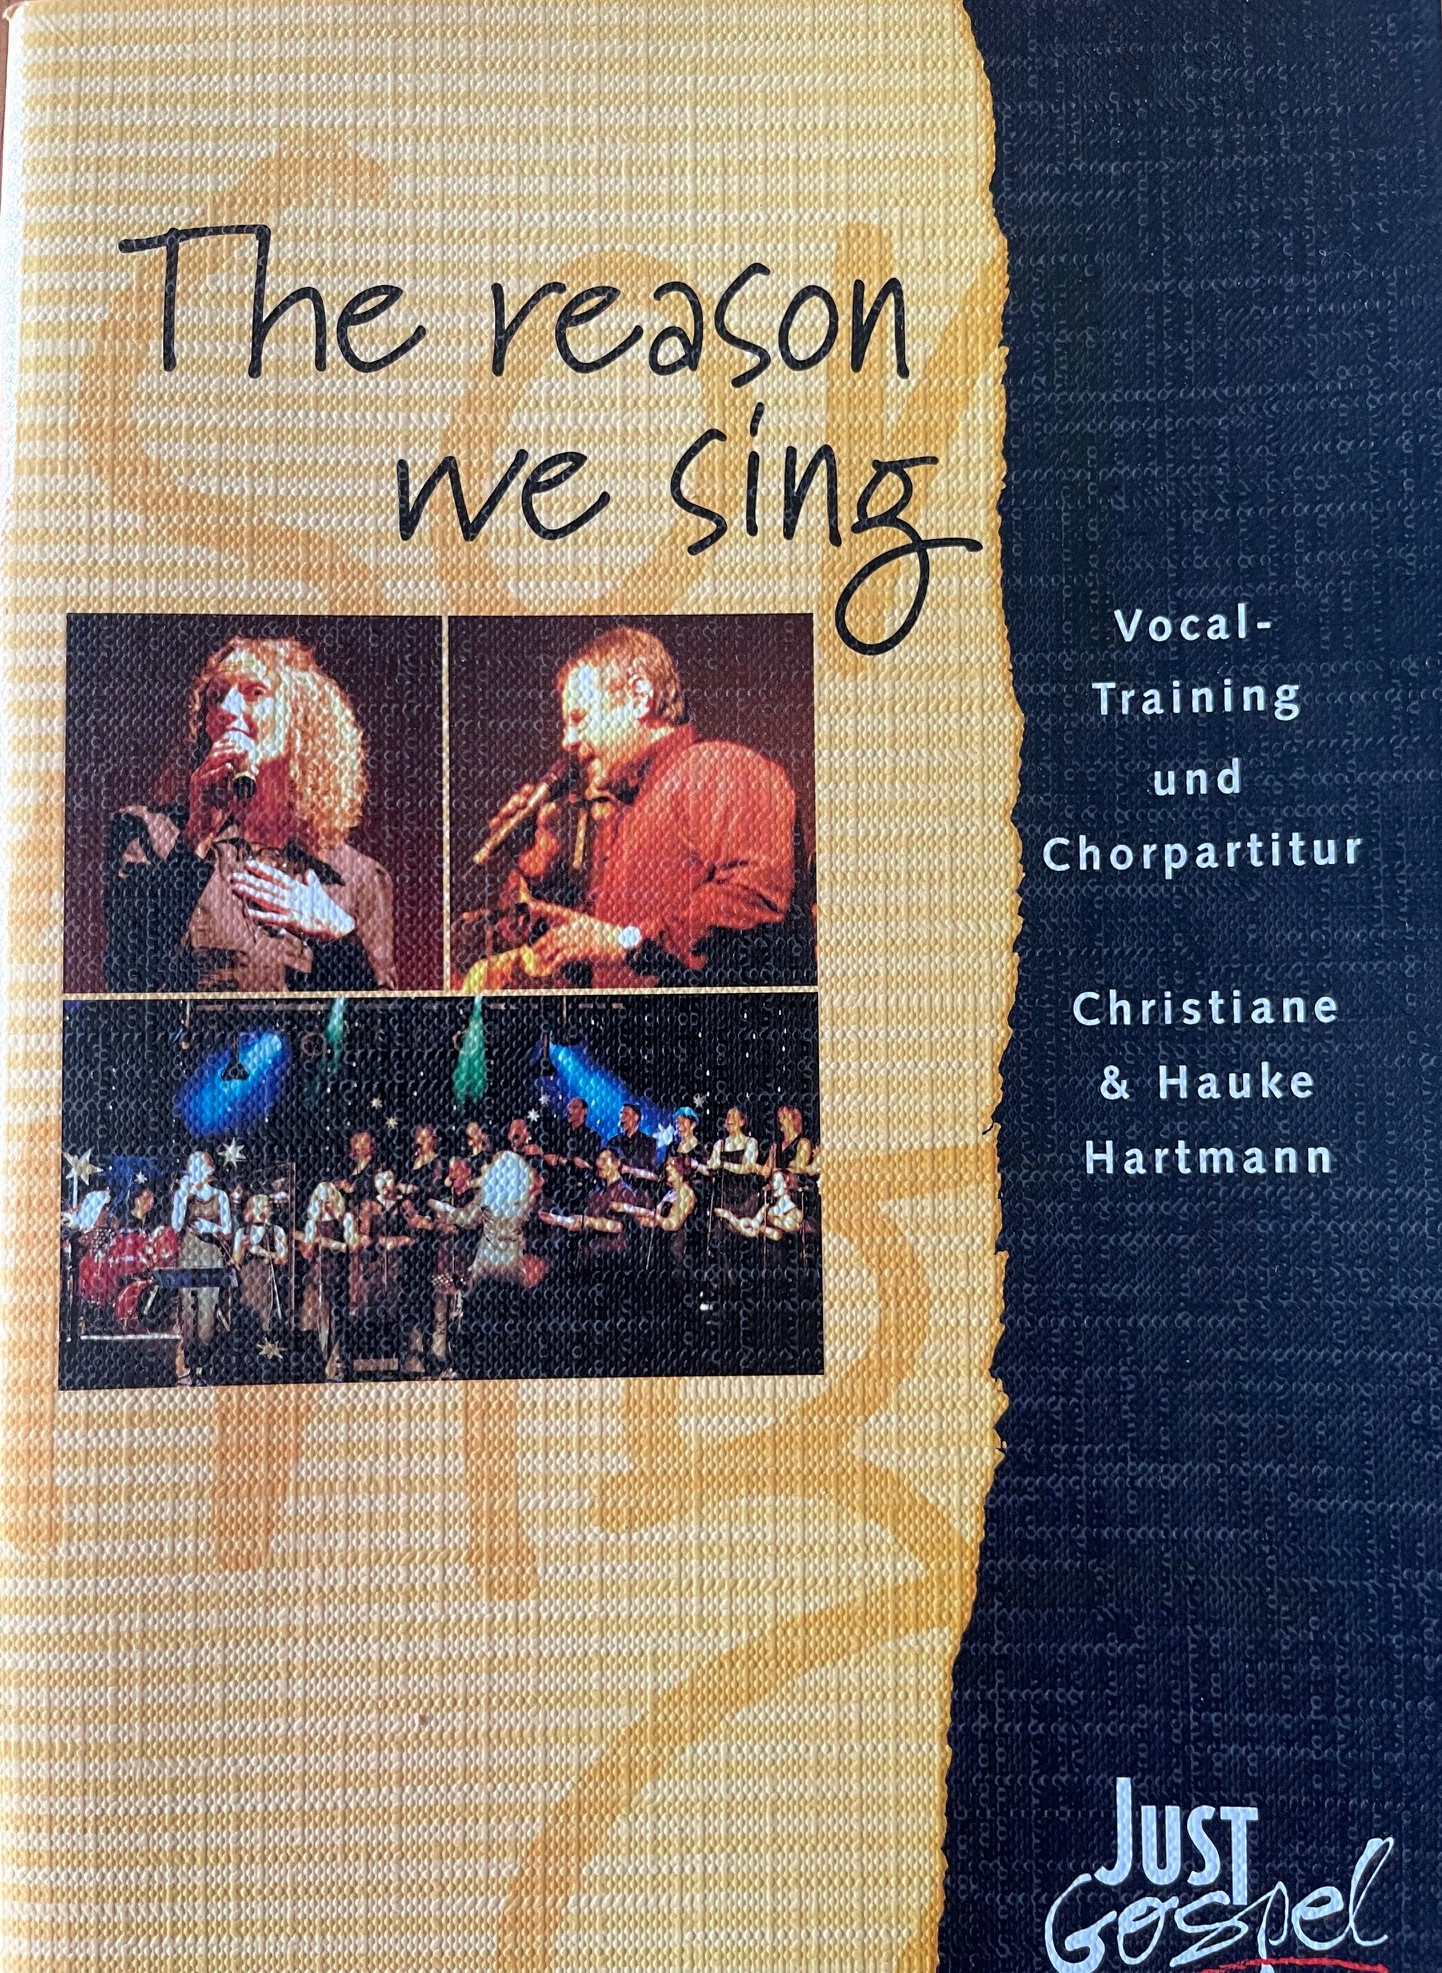 2003 The reason we sing